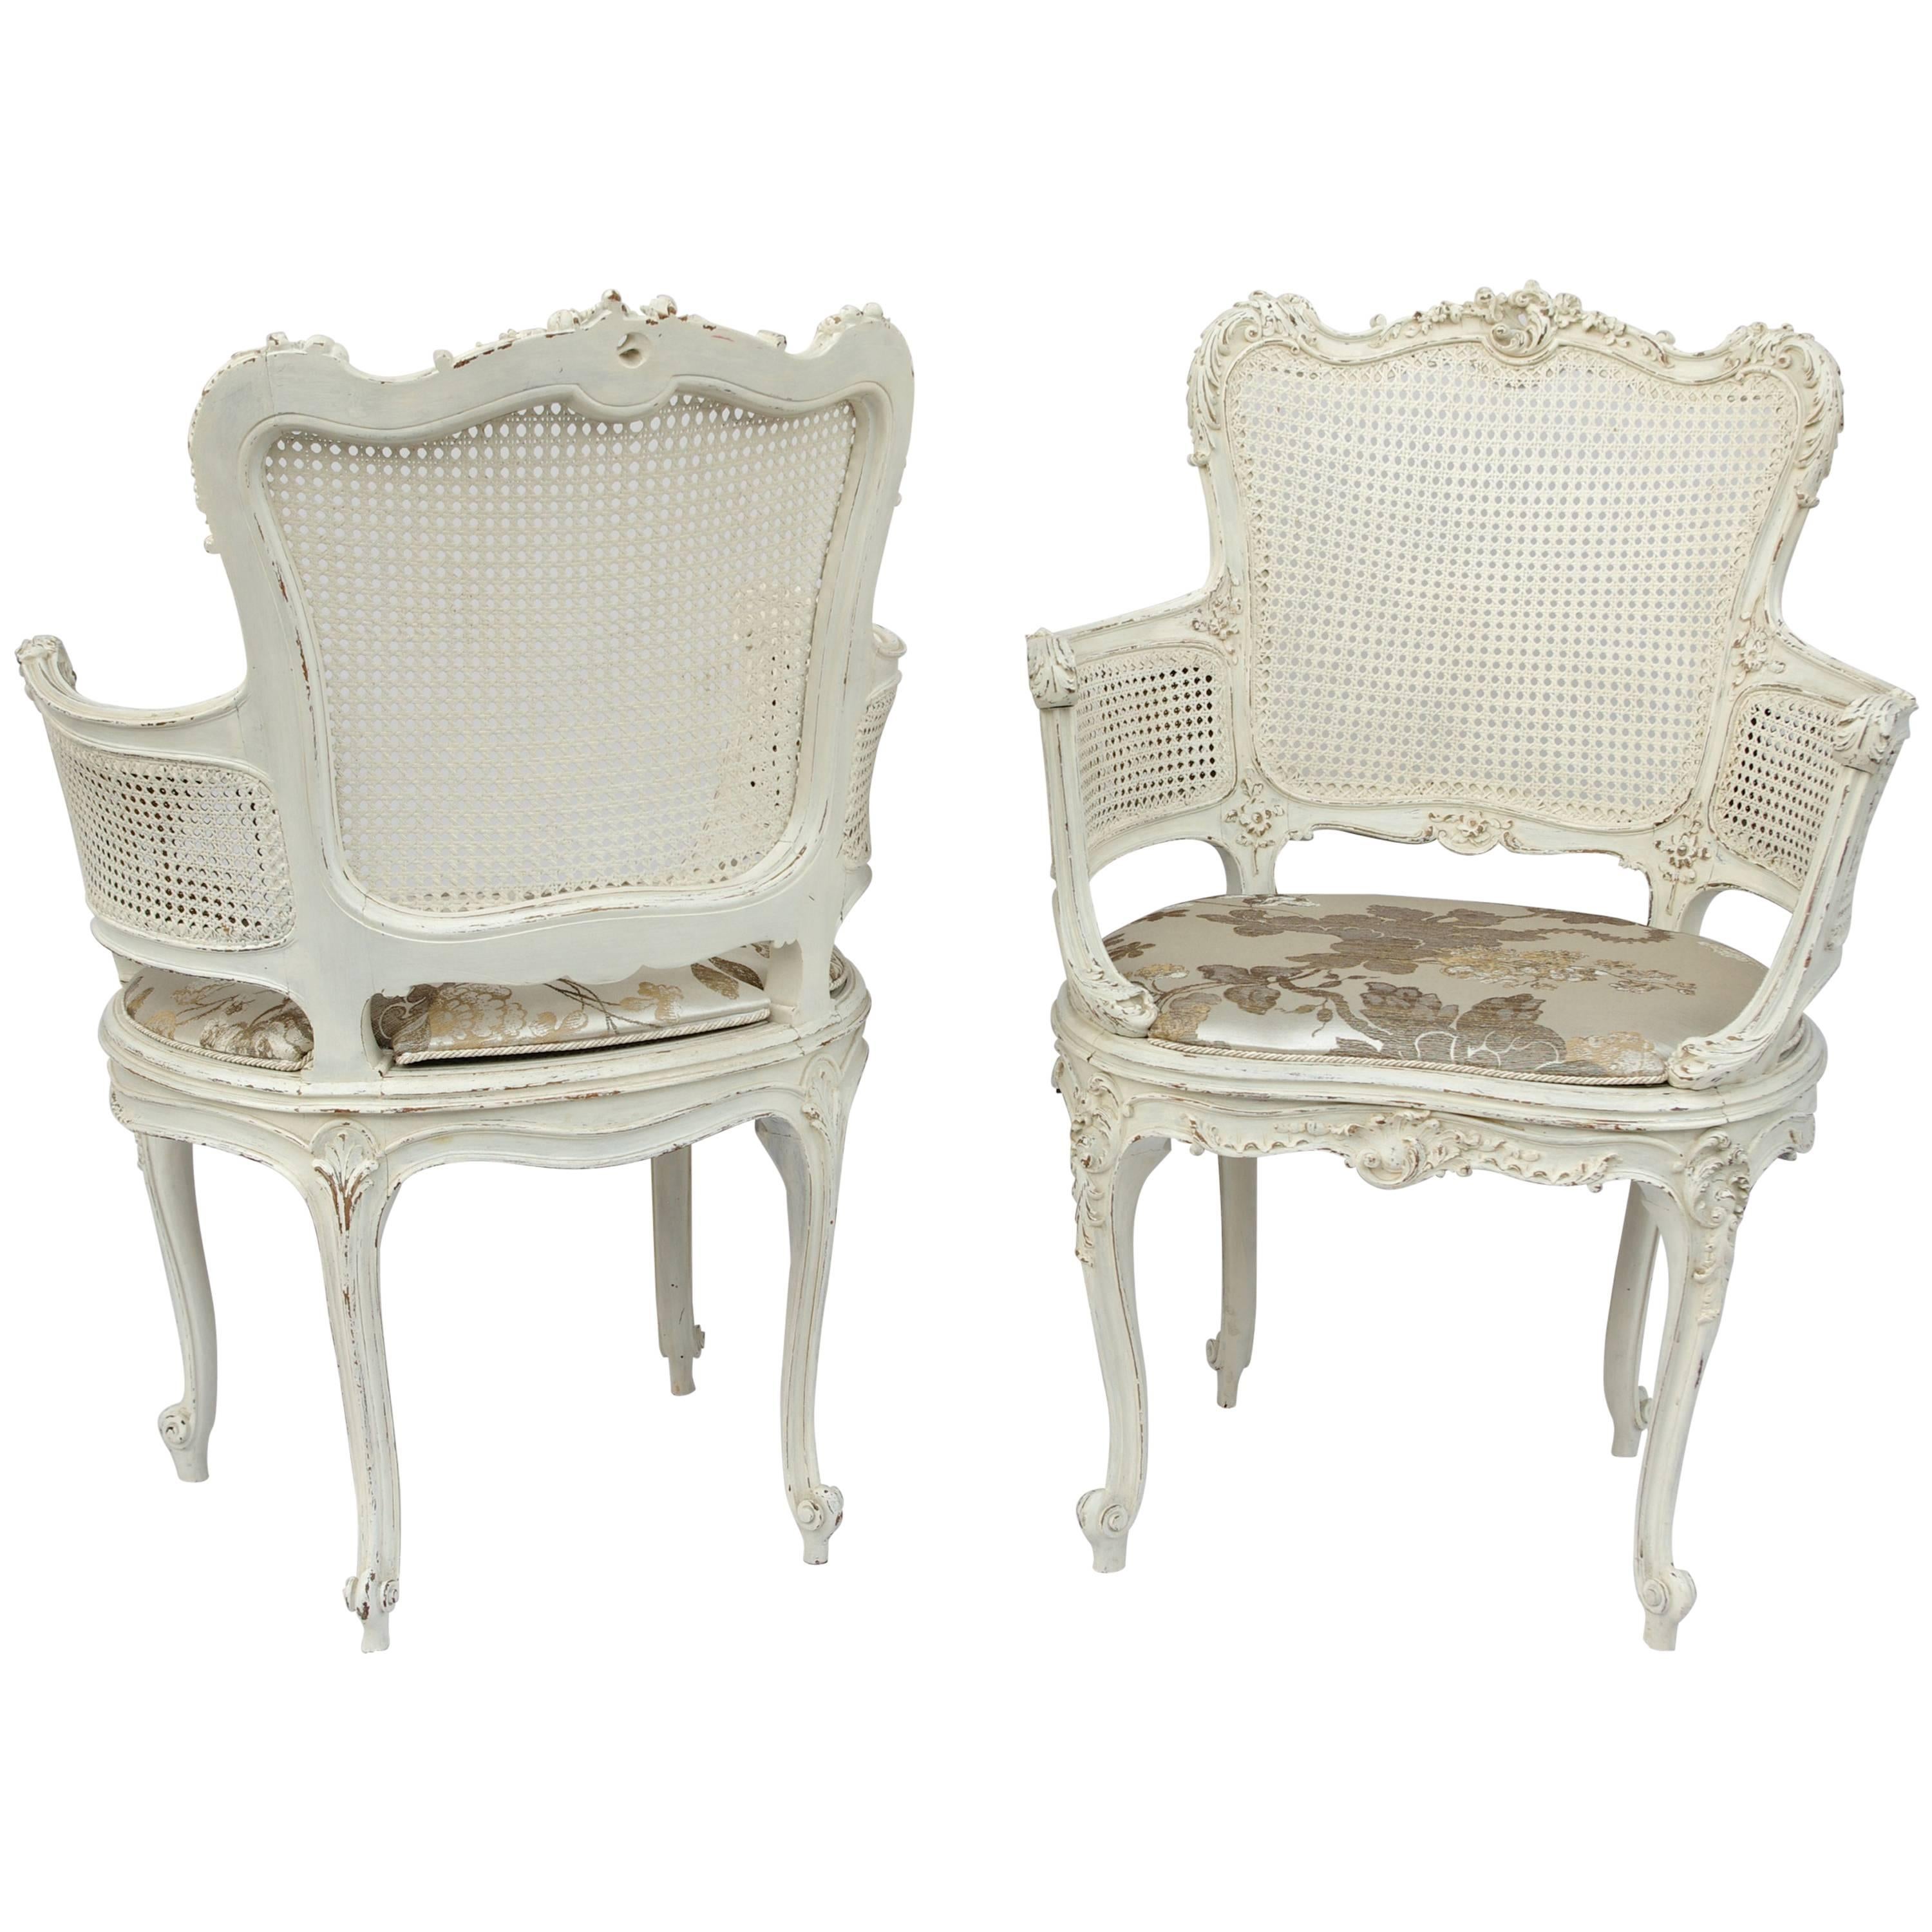 19th Century Pair of Louis XV Style White Lacquer Armchairs